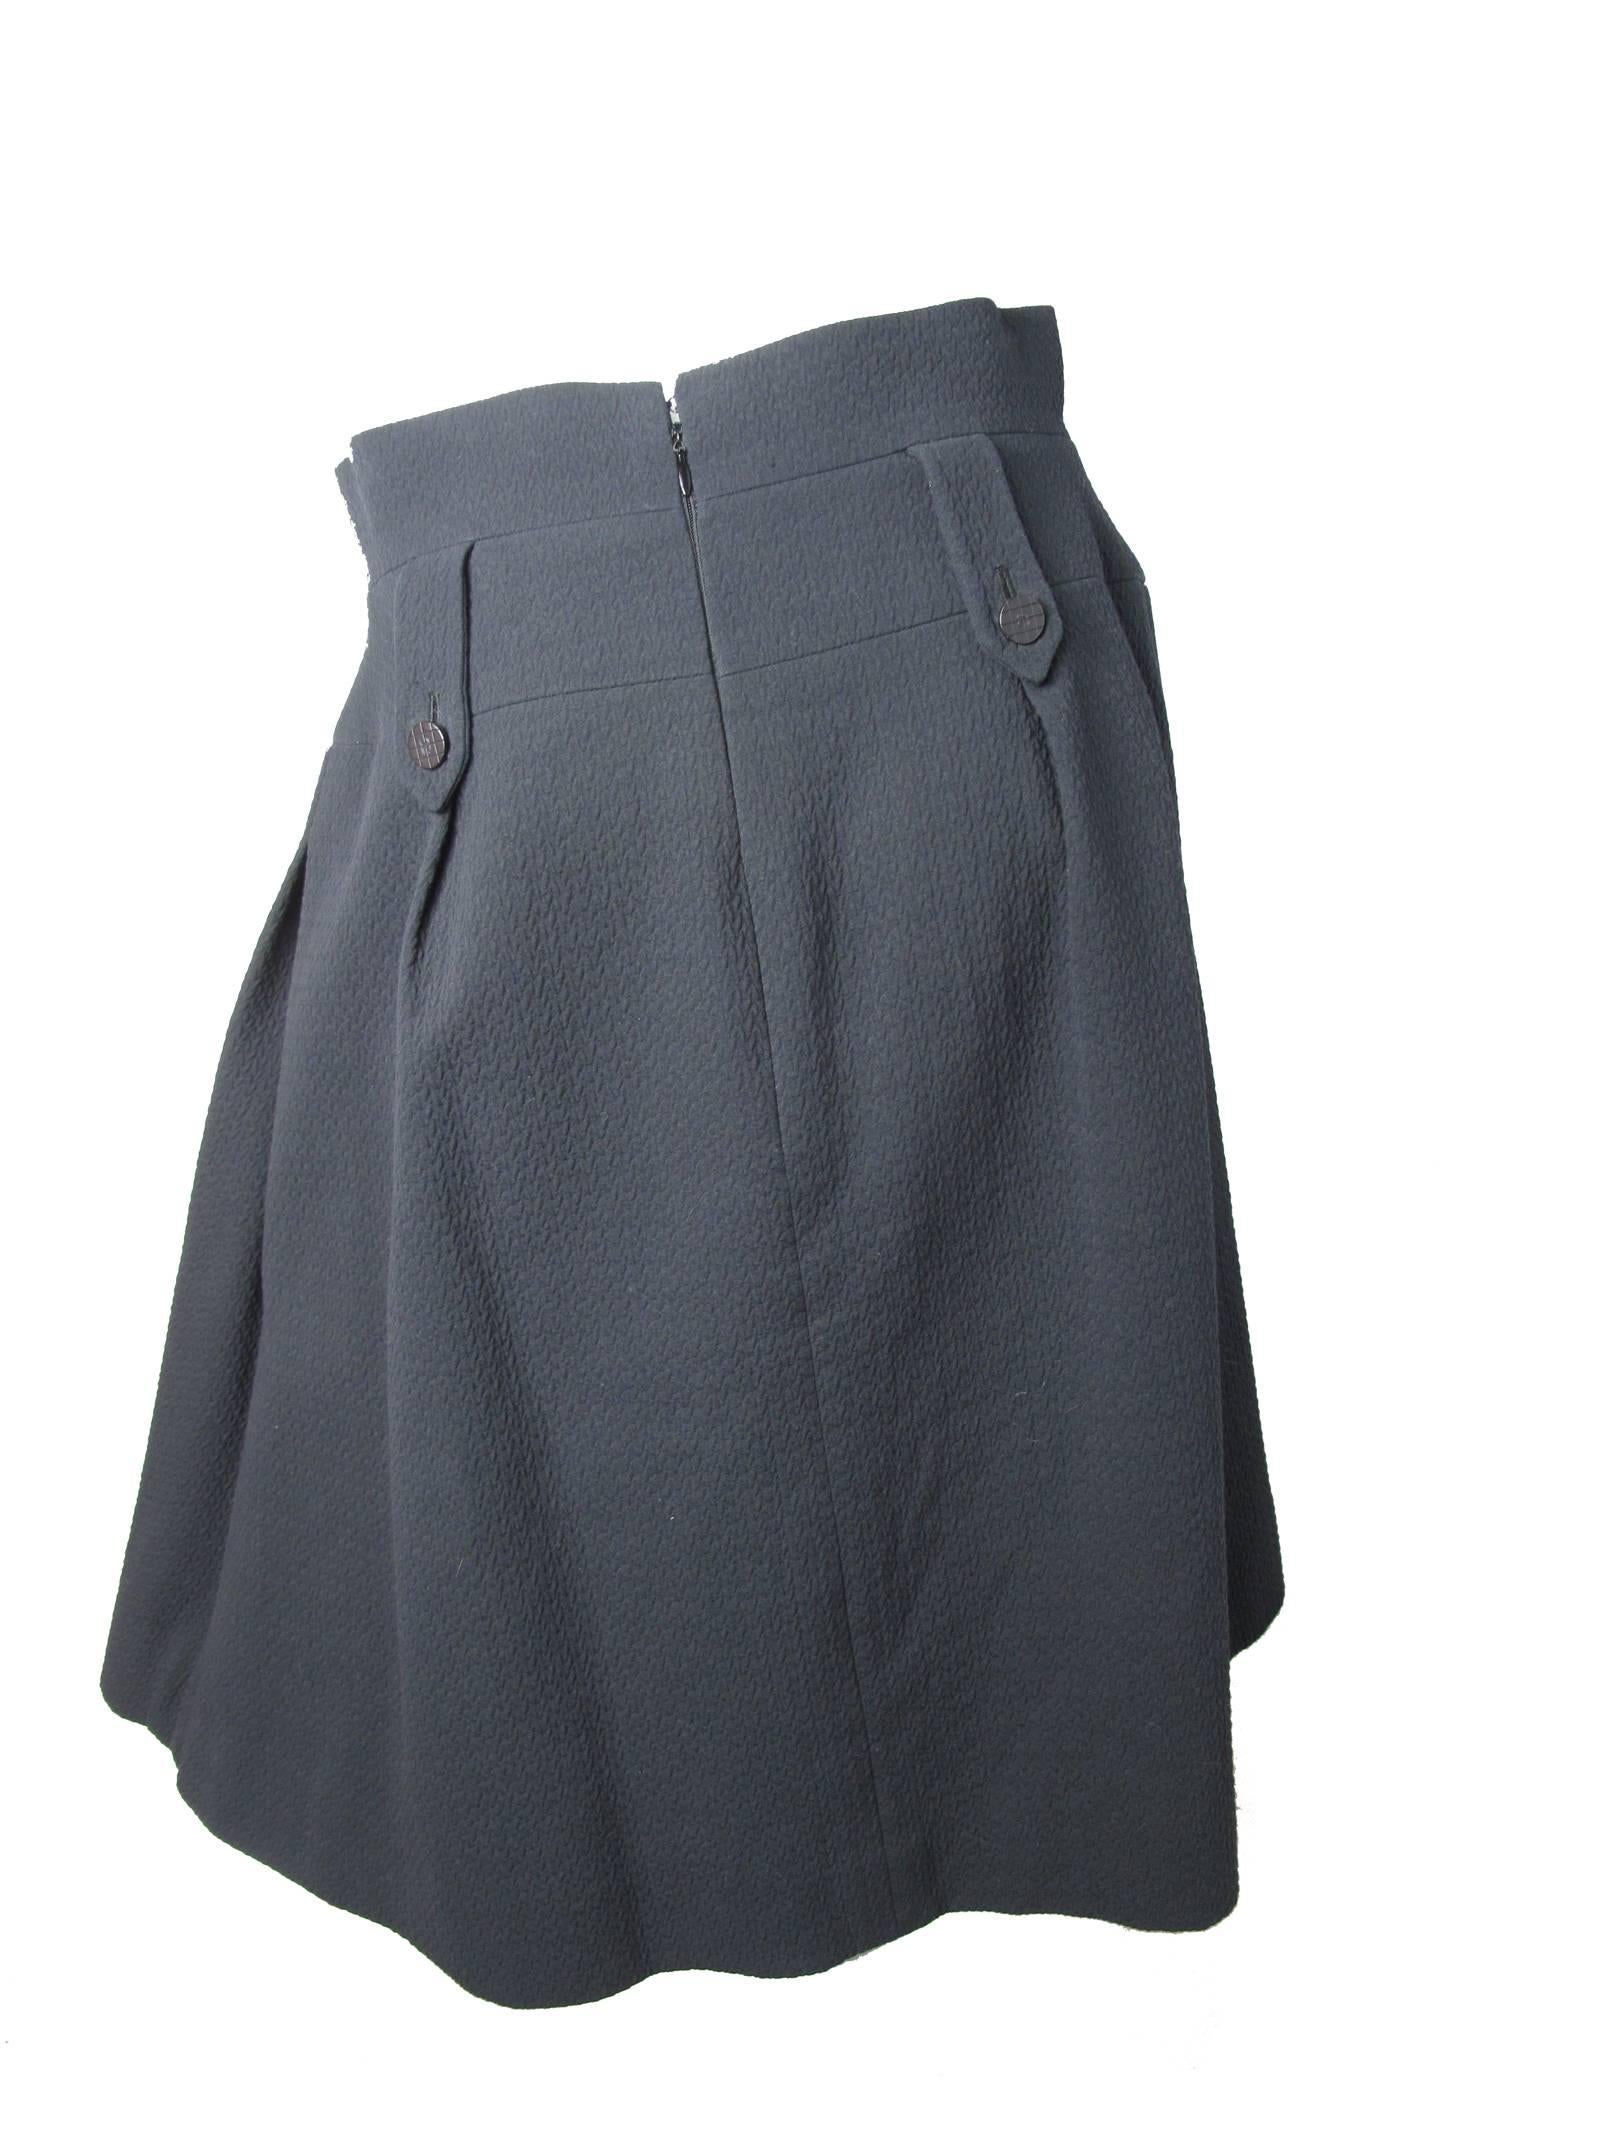 2001 Chanel black cotton dirndl skirt; double tab trim in front and back, high waist, side pockets, Condition: Excellent. Size 42

We accept returns for refund, please see our terms.  We offer free ground shipping within the US.  Please let us